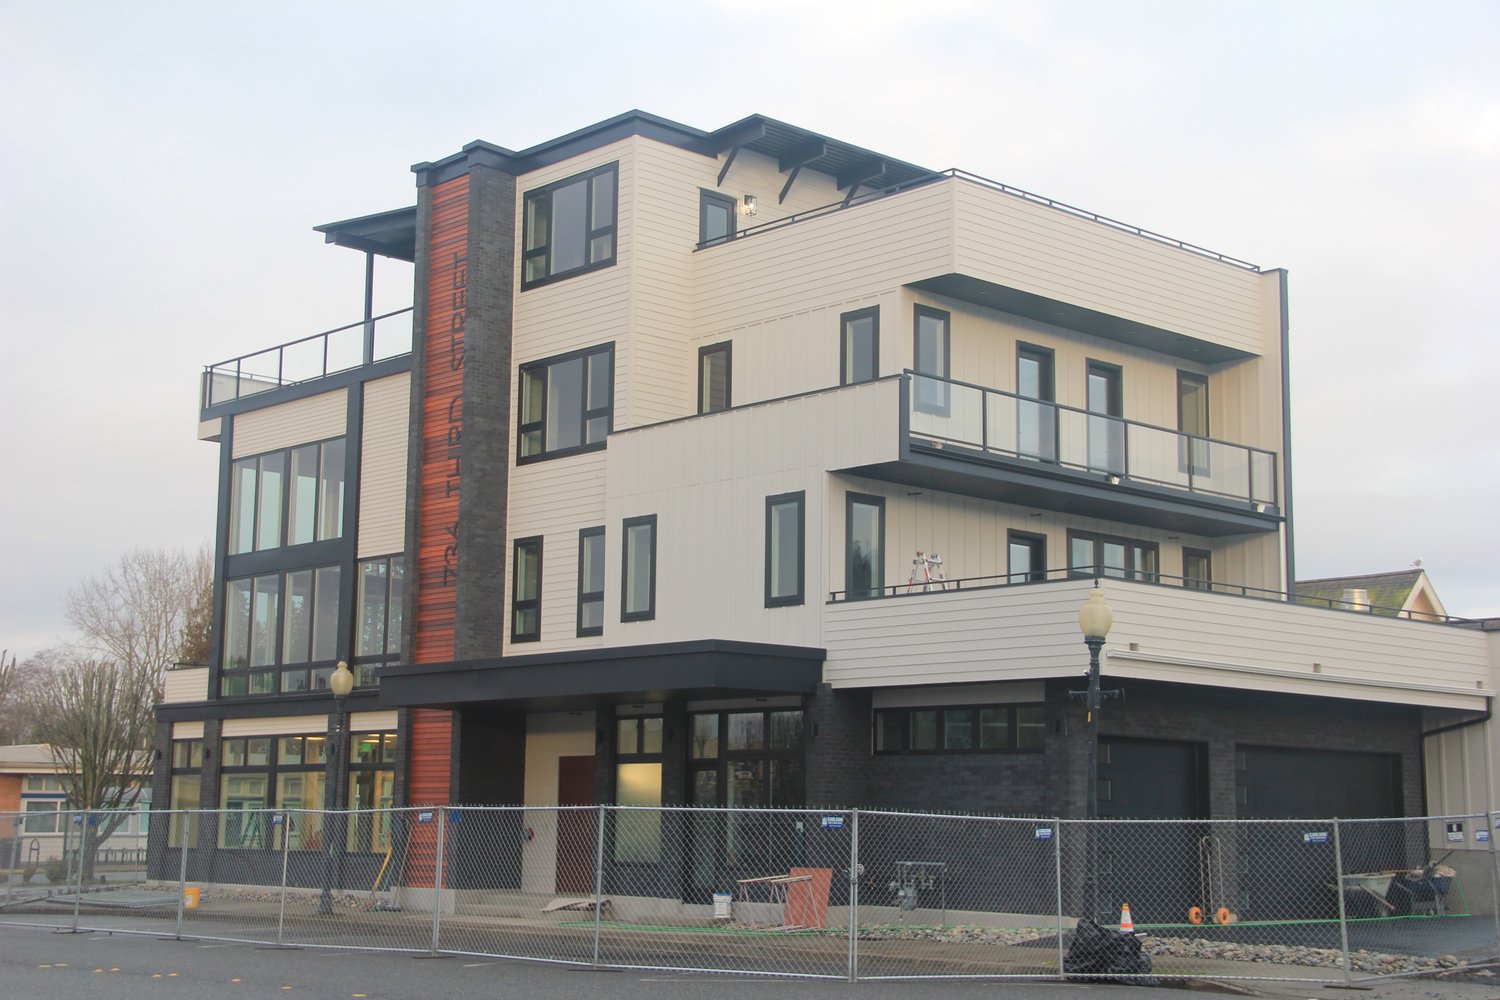 The modern mixed-use building at 736 3rd Street on January 23.